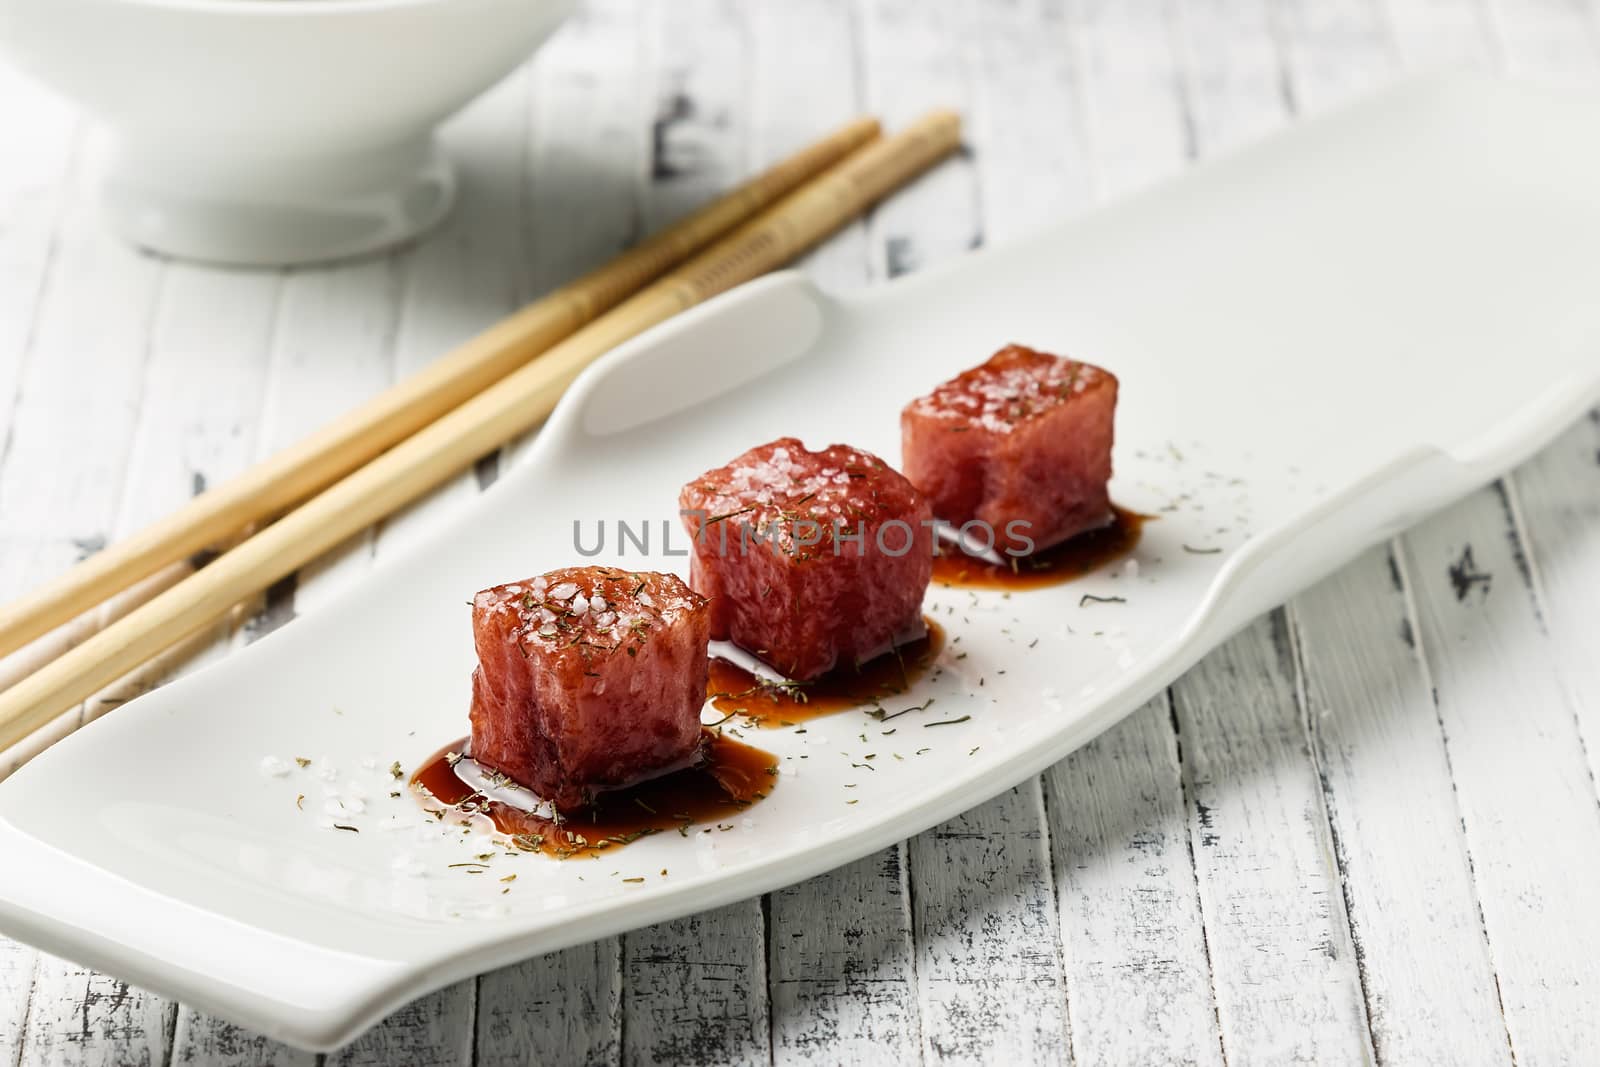 Tuna sashimi dipped in soy sauce,  thick salt and dill on old white wooden board with chopsticks and sauce bowl. Raw fish in traditional Japanese style. Horizontal image.